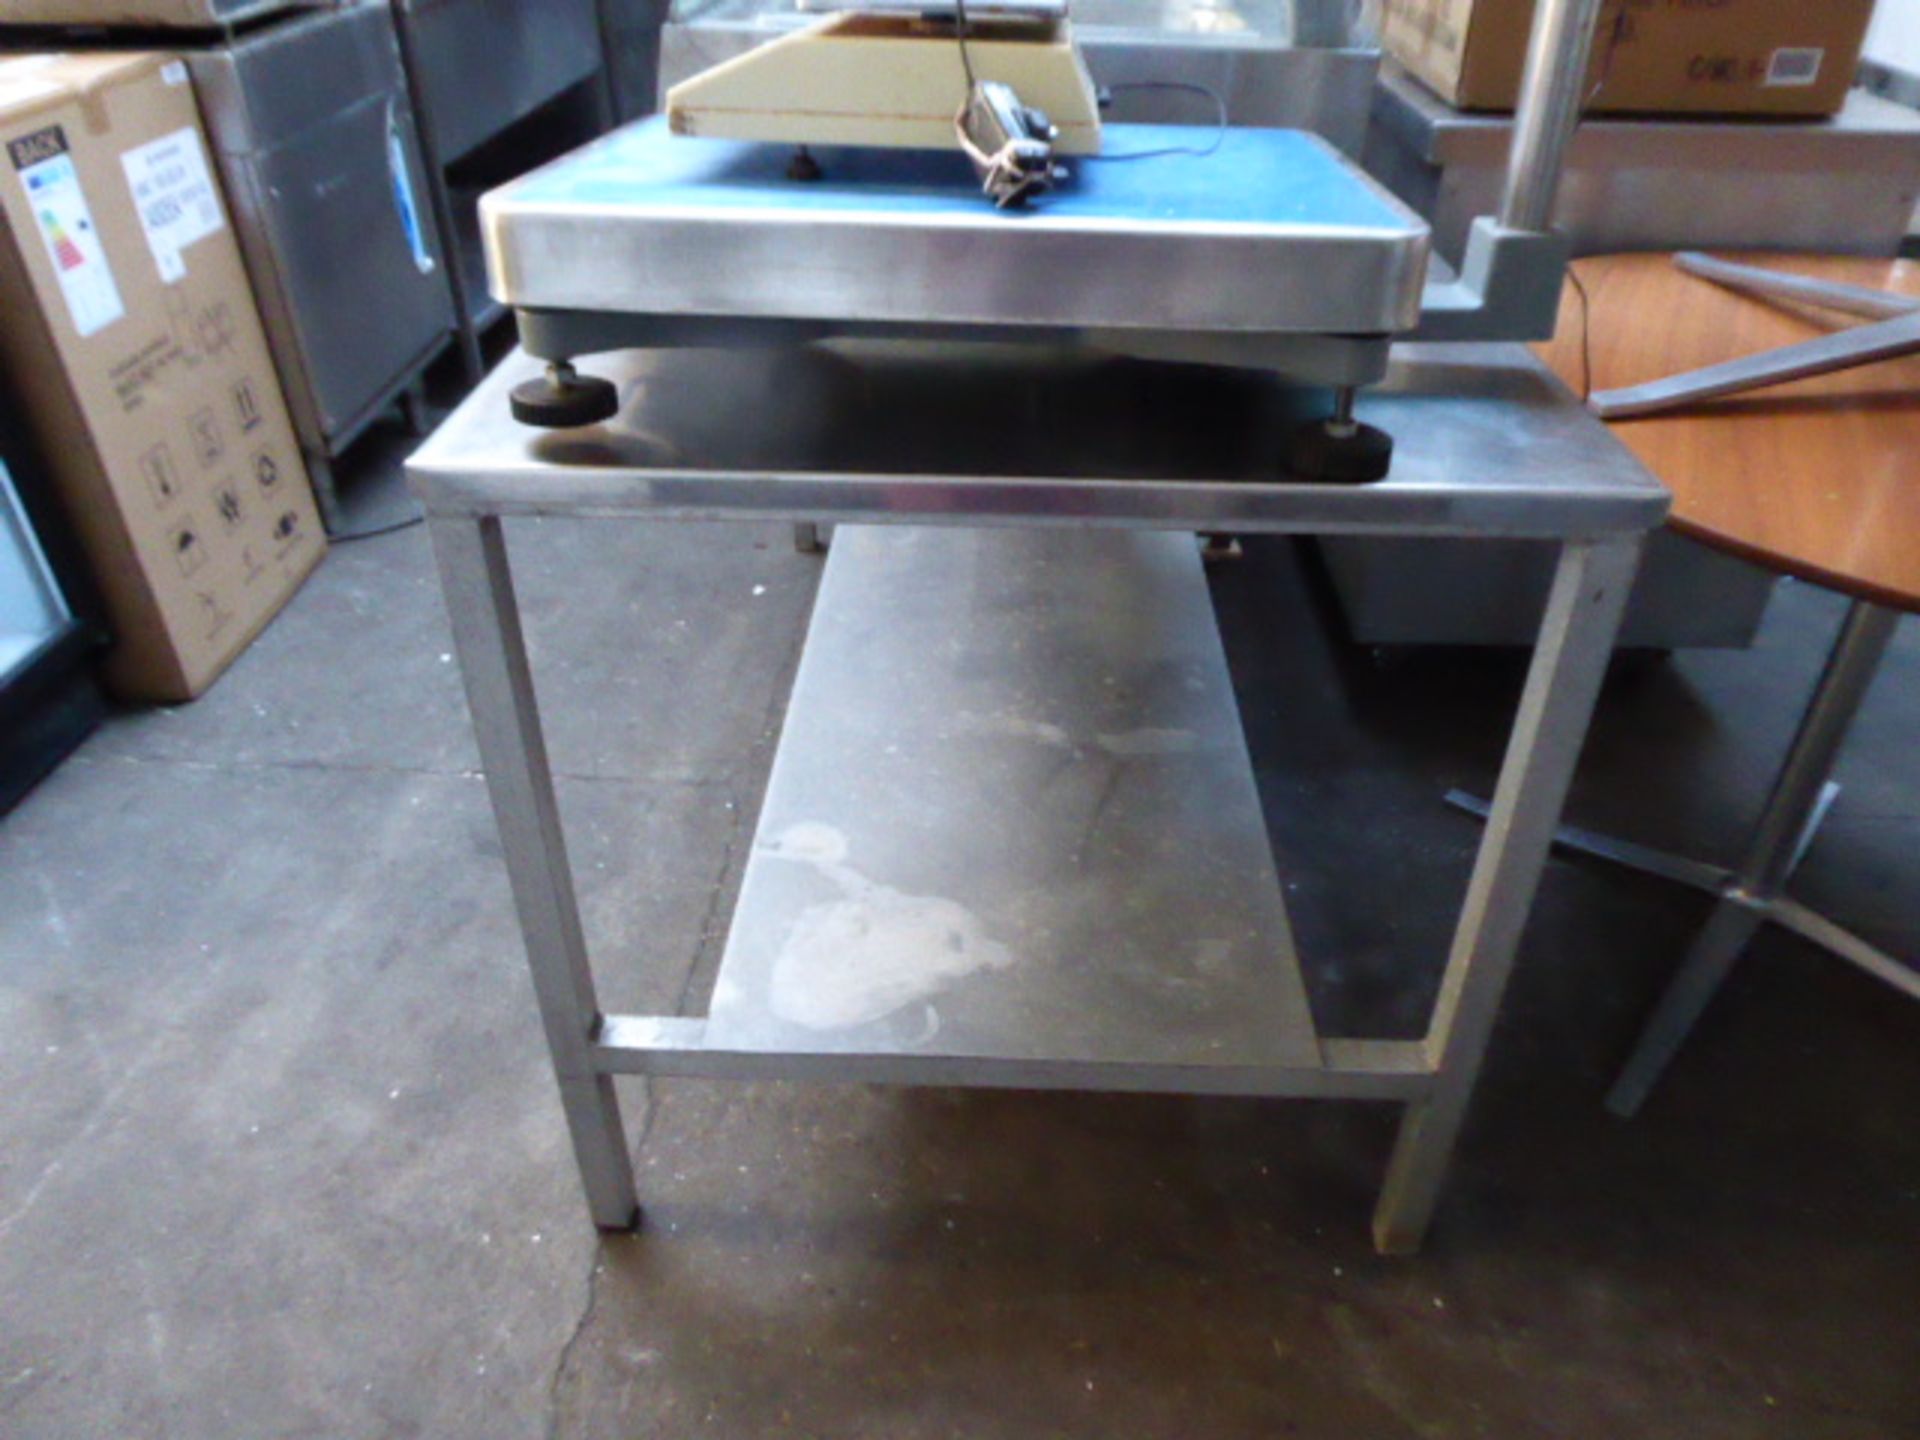 300cm Stainless steel preparation table with shelf under - Image 2 of 2